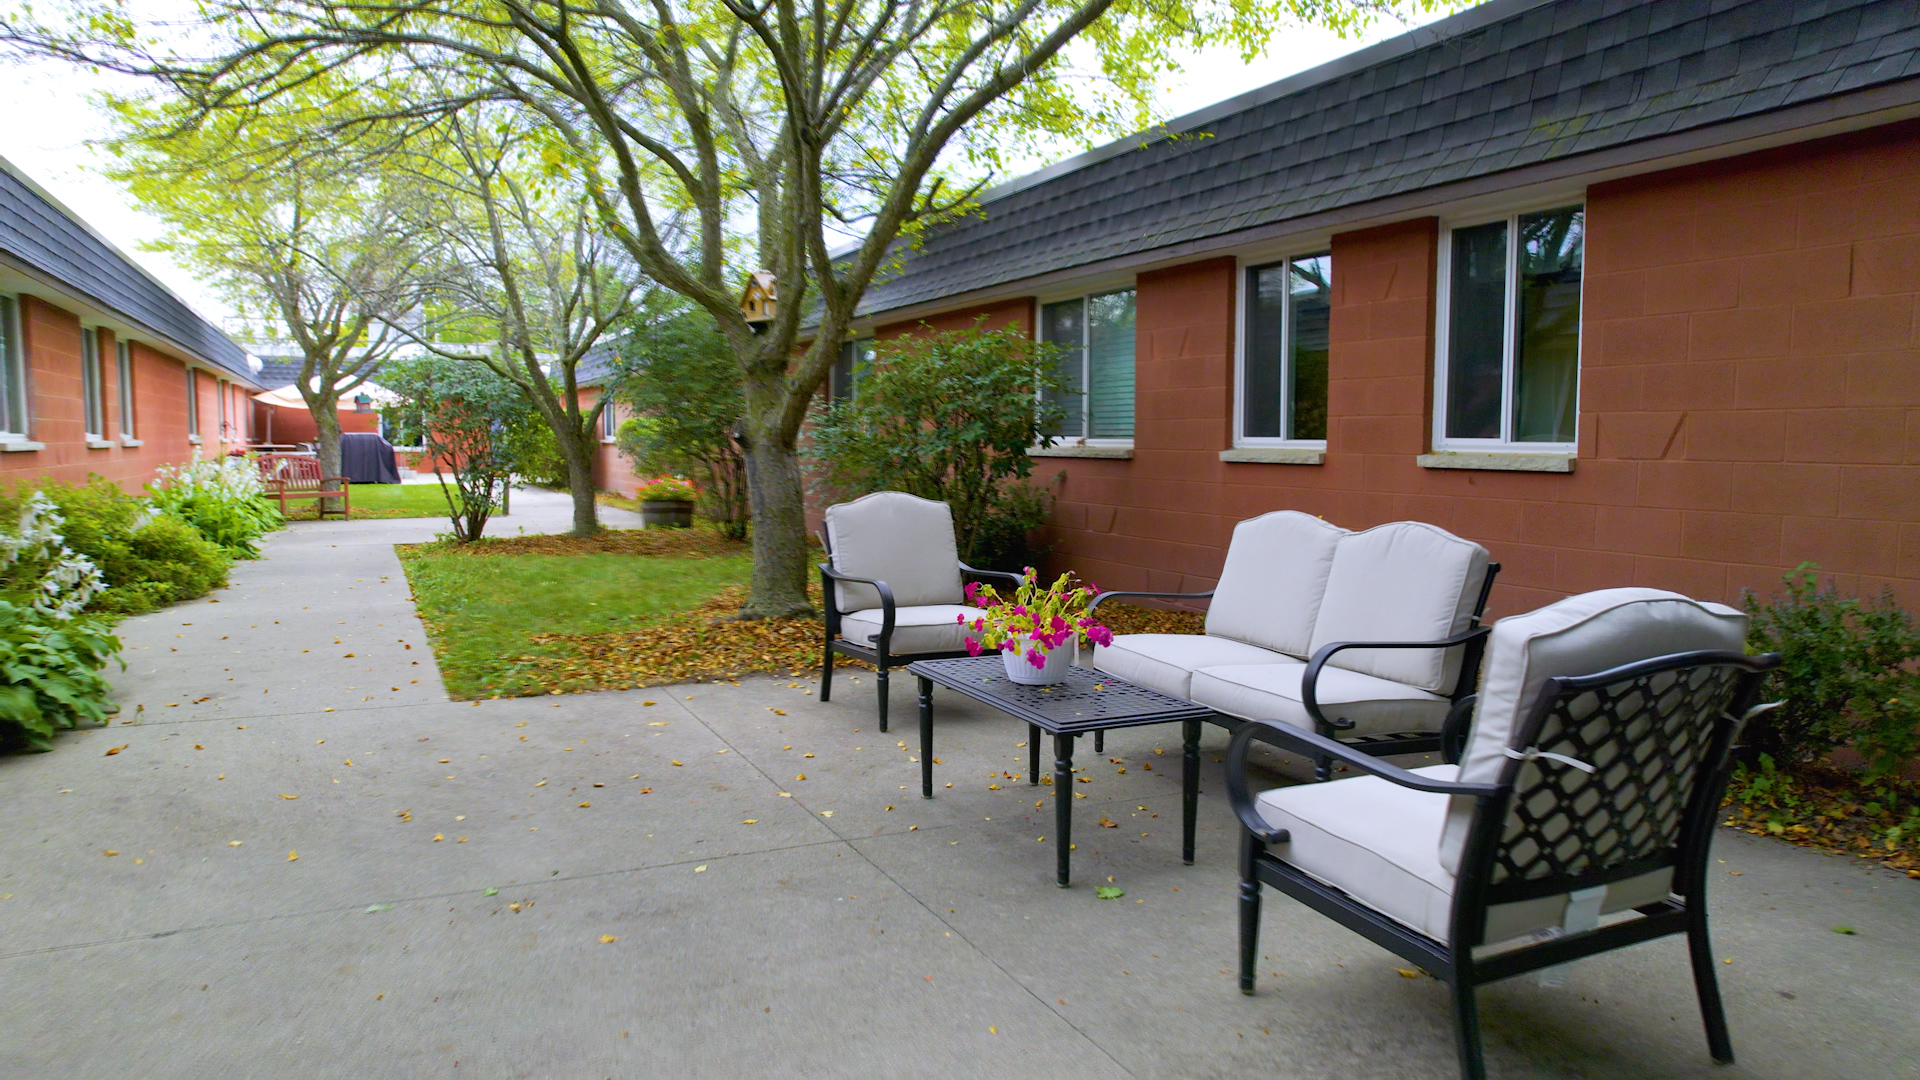 Table with flower vase and chairs in the patio. Trees and plants on the background.